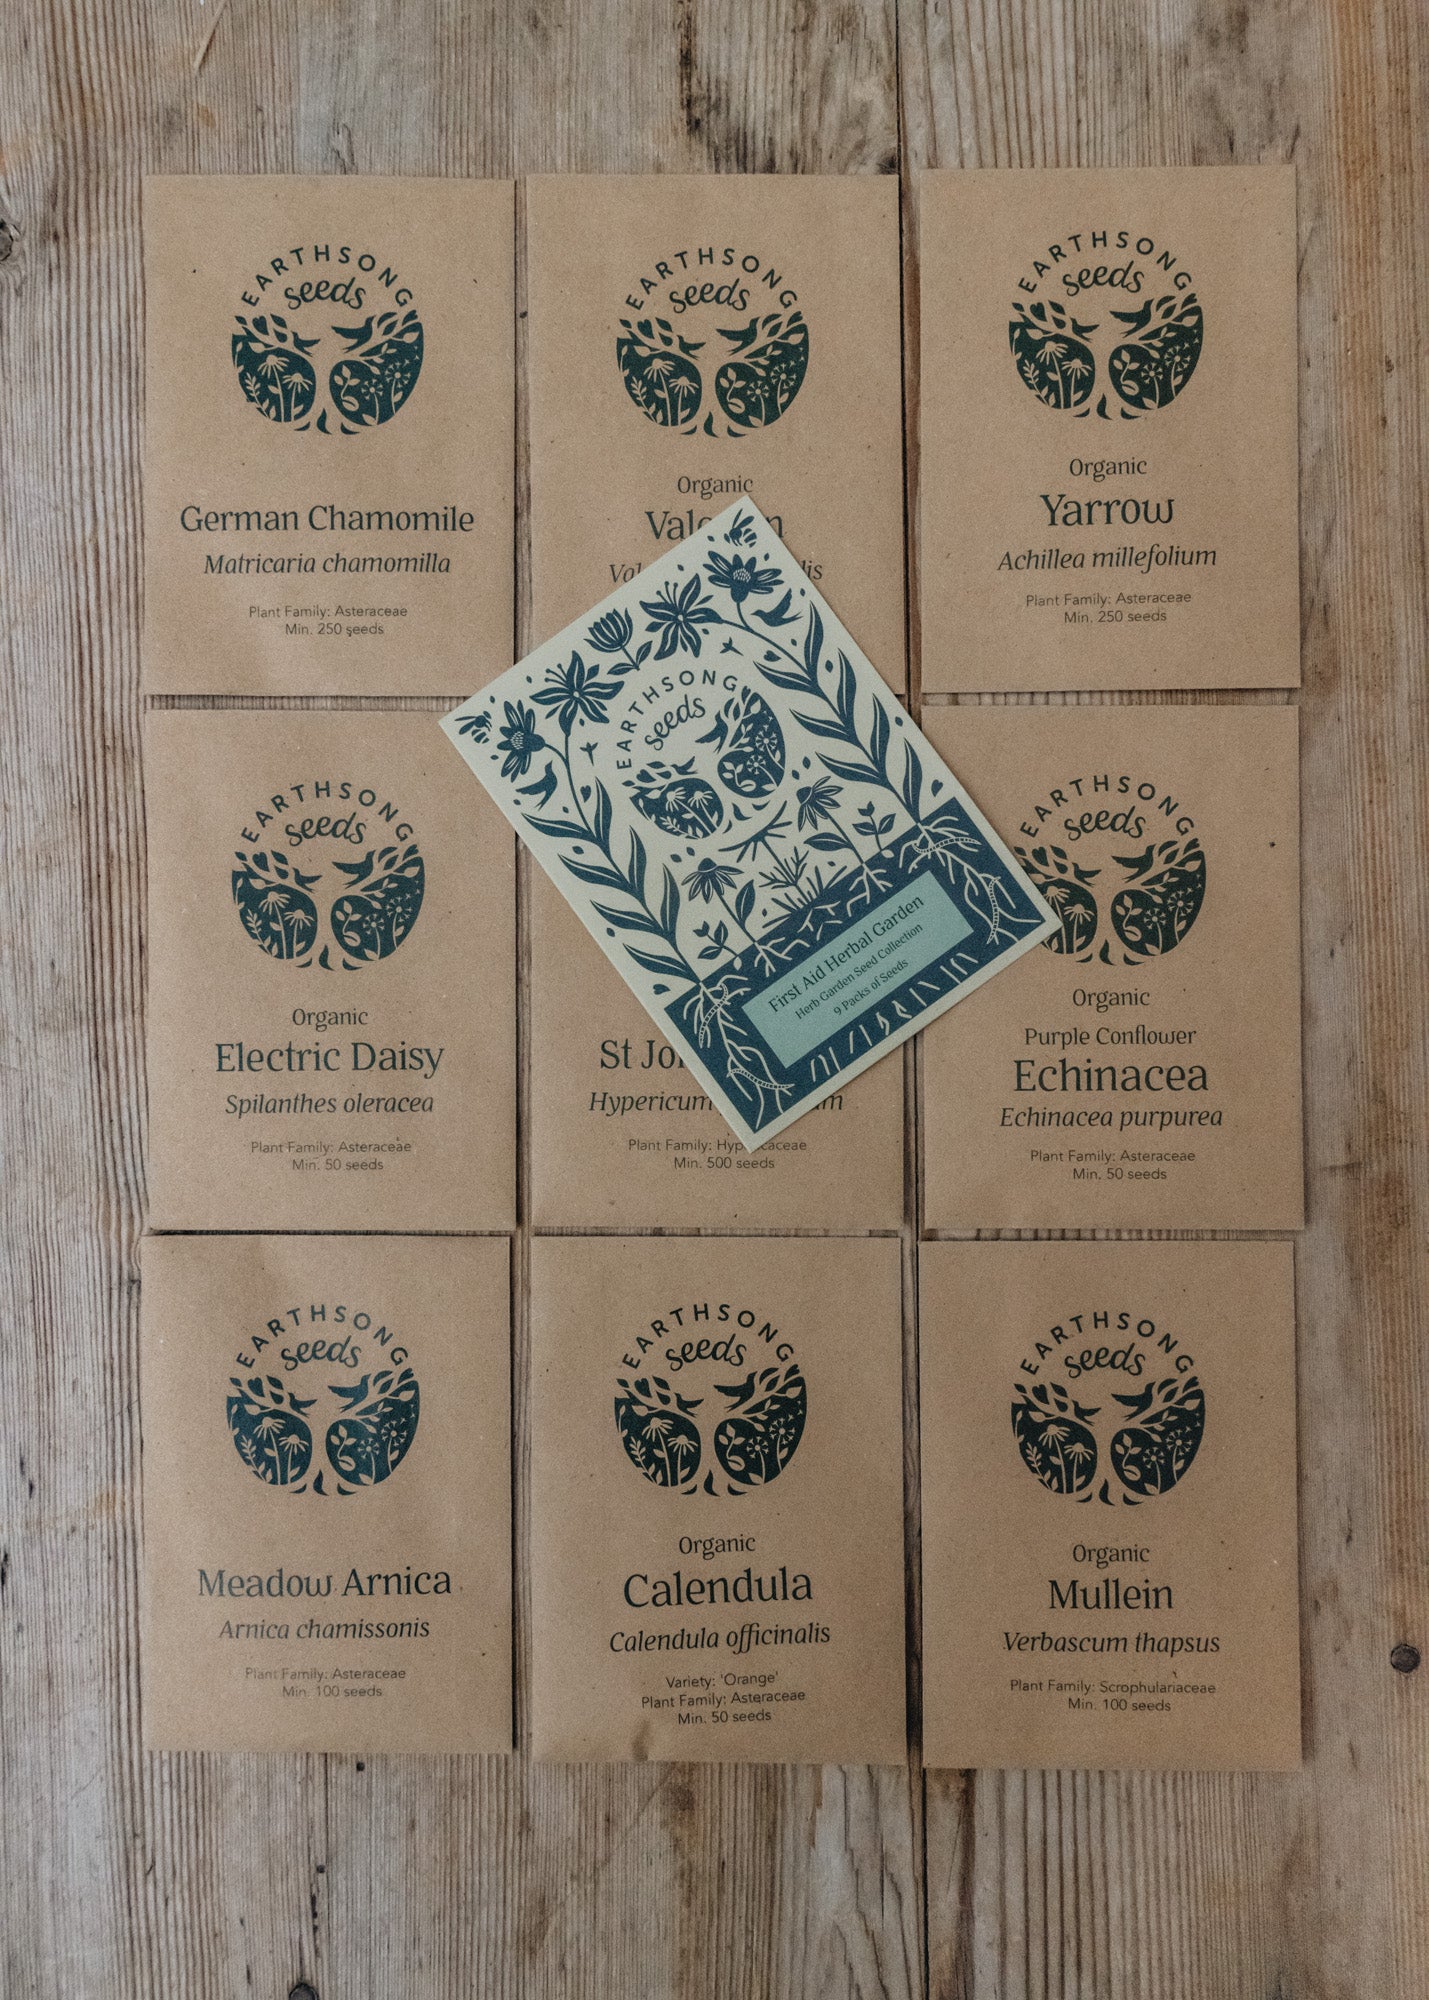 Earthsong Seeds The First Aid Herbal Garden Seed Collection